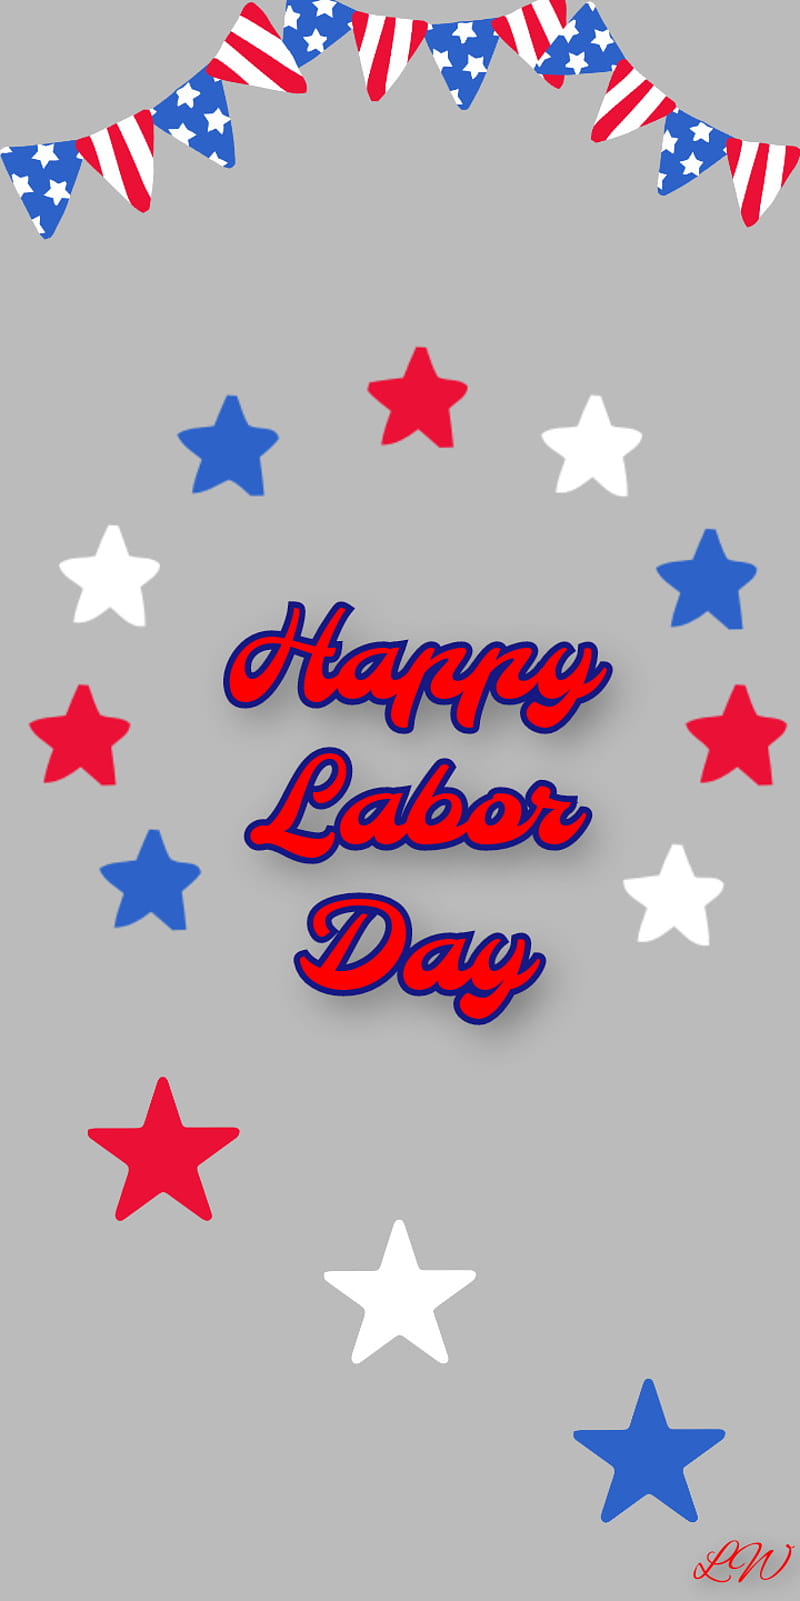 Labor day weekend, celebrate, red white and blue, holiday, labor day